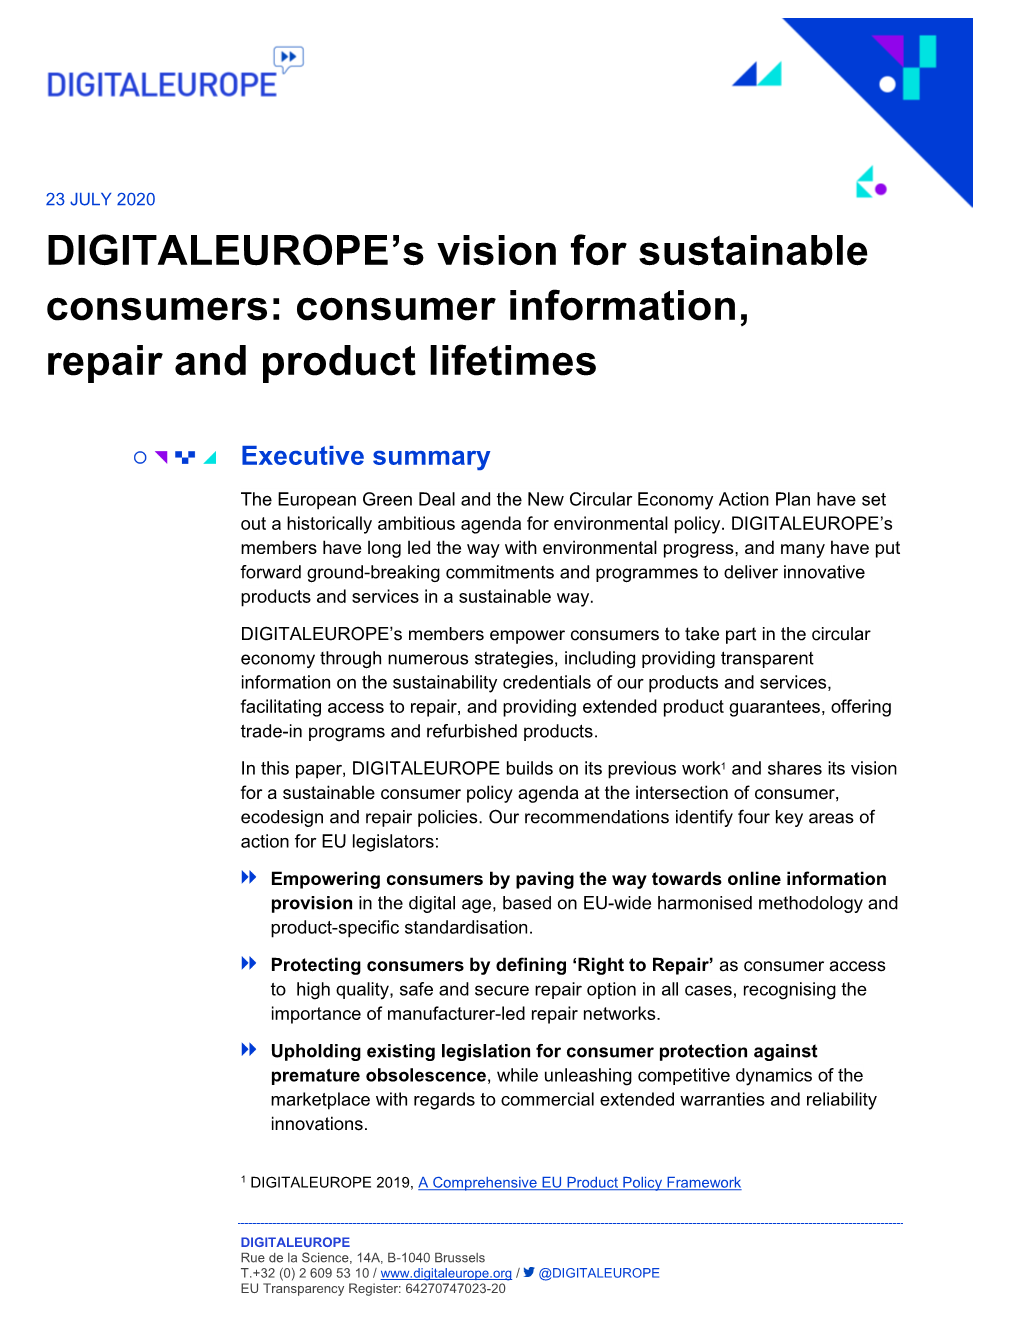 DIGITALEUROPE's Vision for Sustainable Consumers